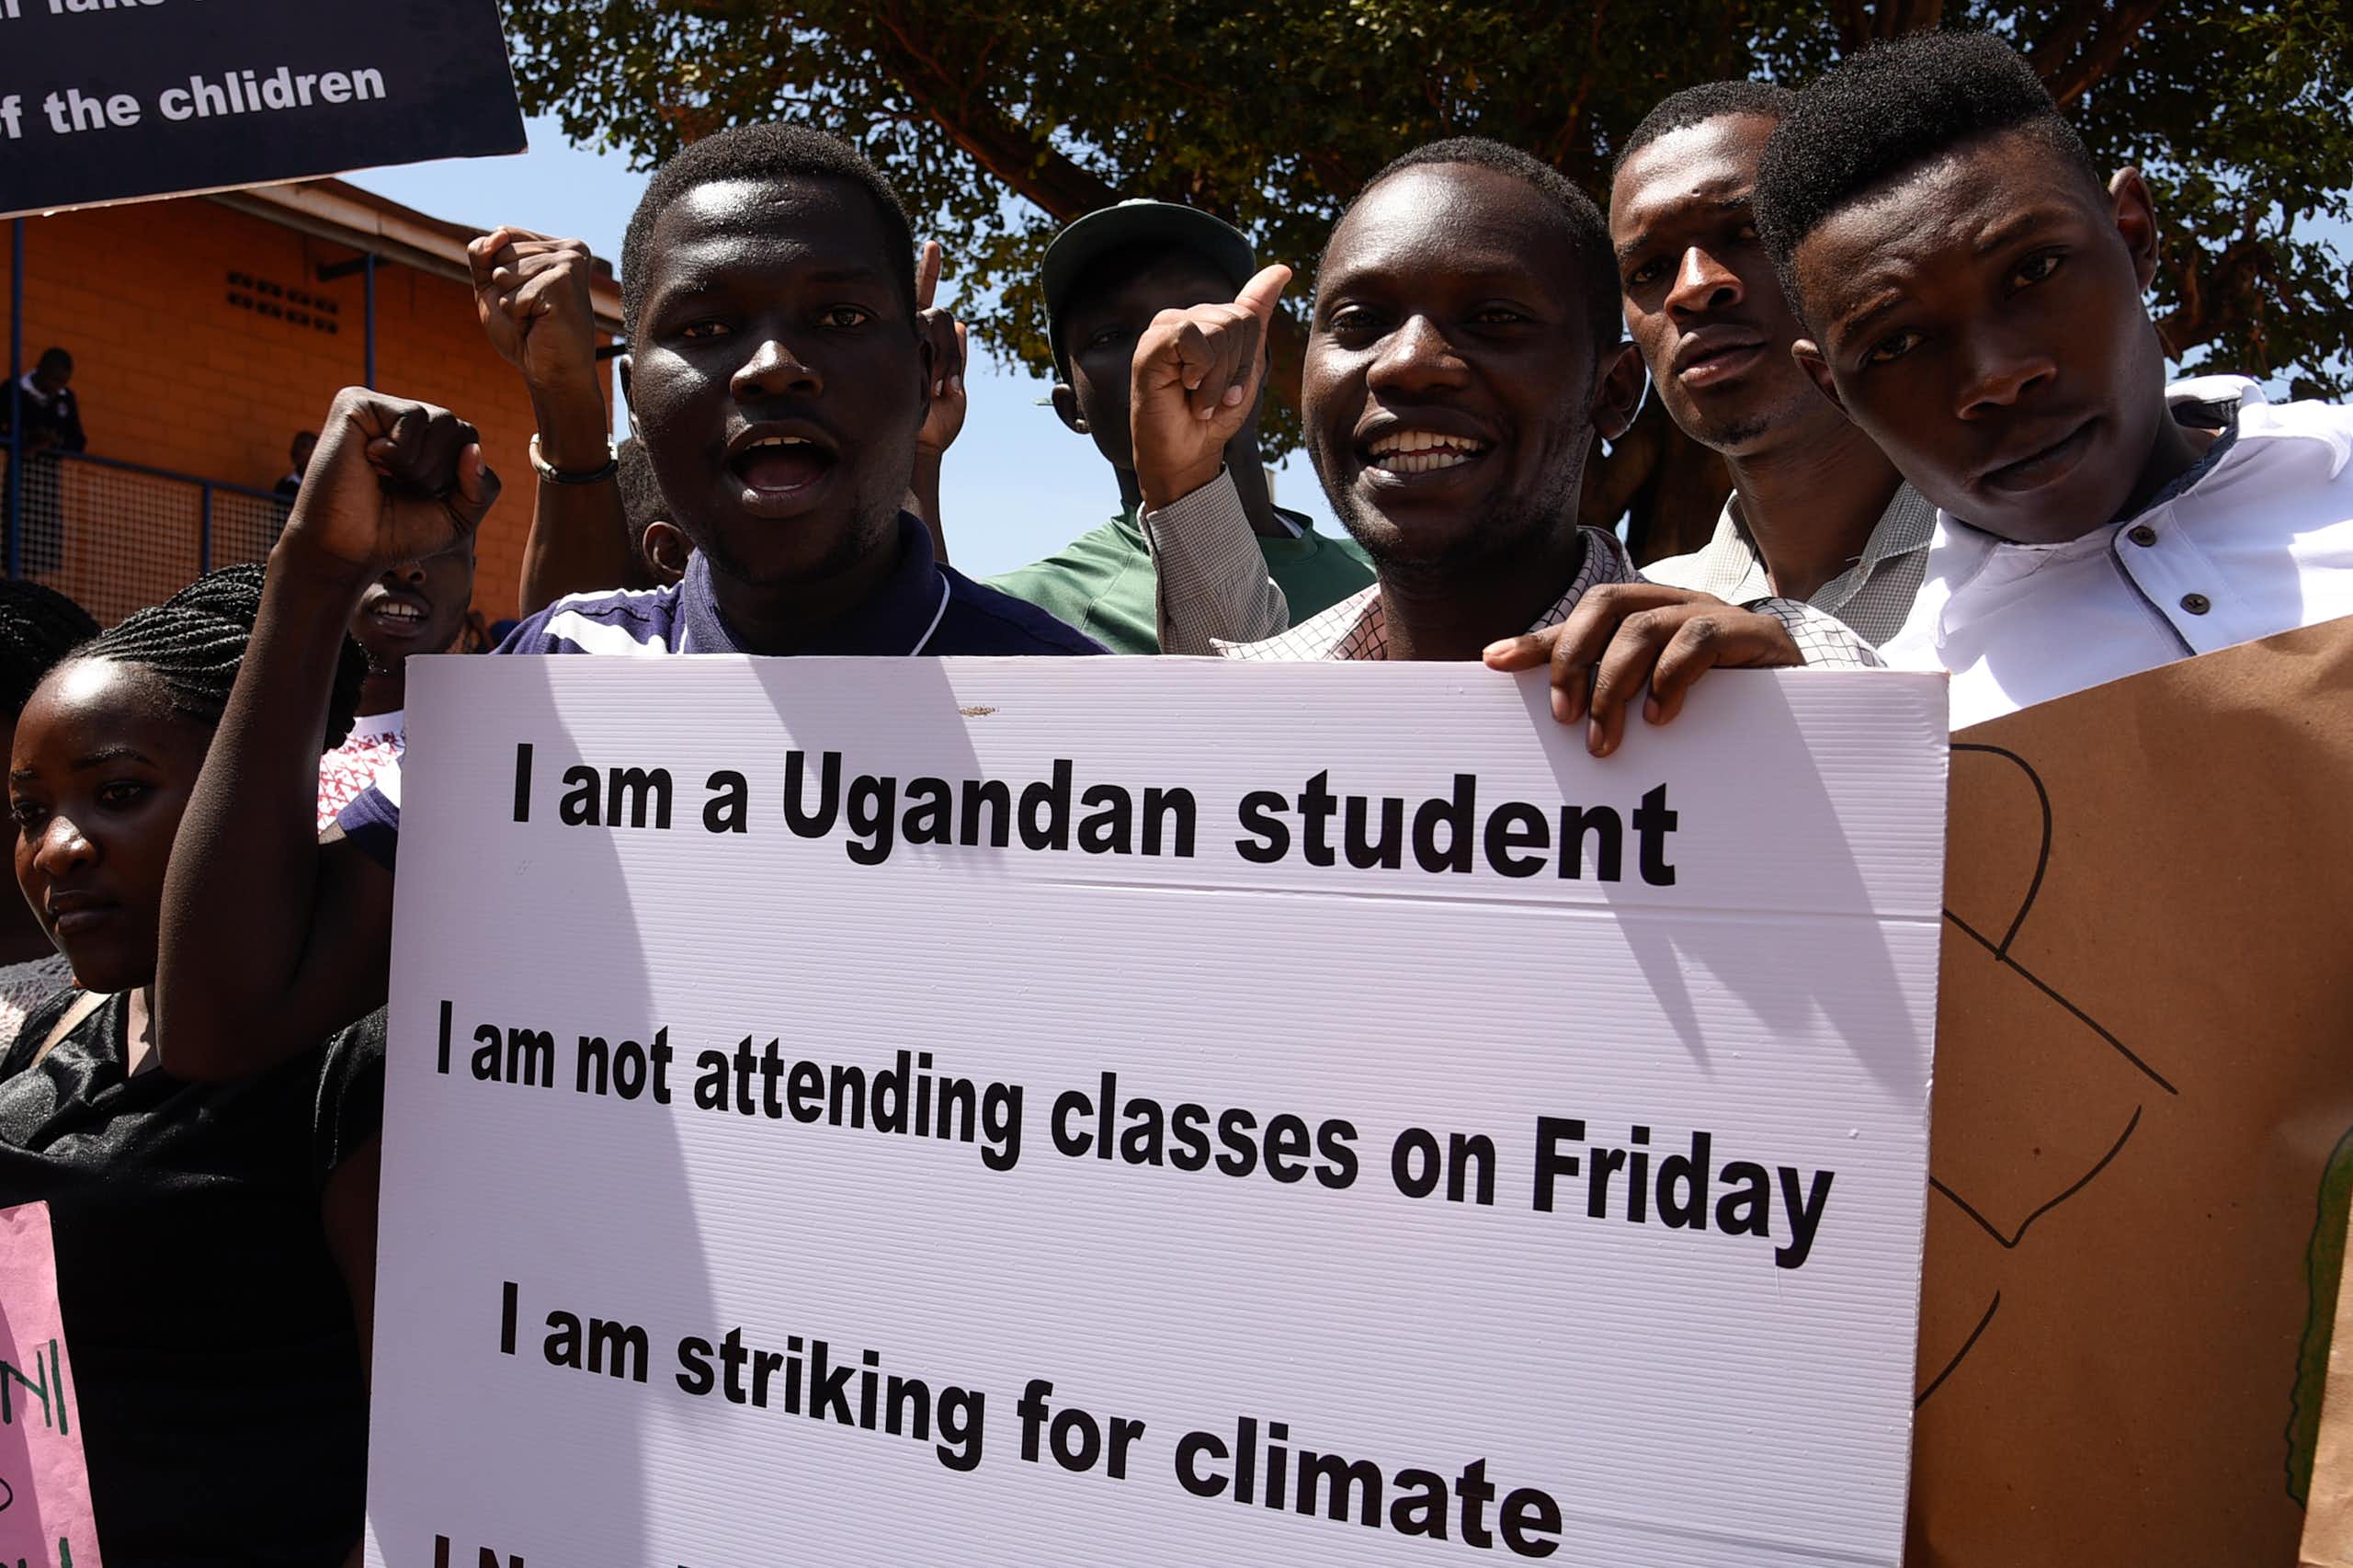 A young man holds up a placard that reads "I am a Ugandan student I am not attending classes on Friday I am striking for climate". He is surrounded by others who are raising their fists or holding similar placards